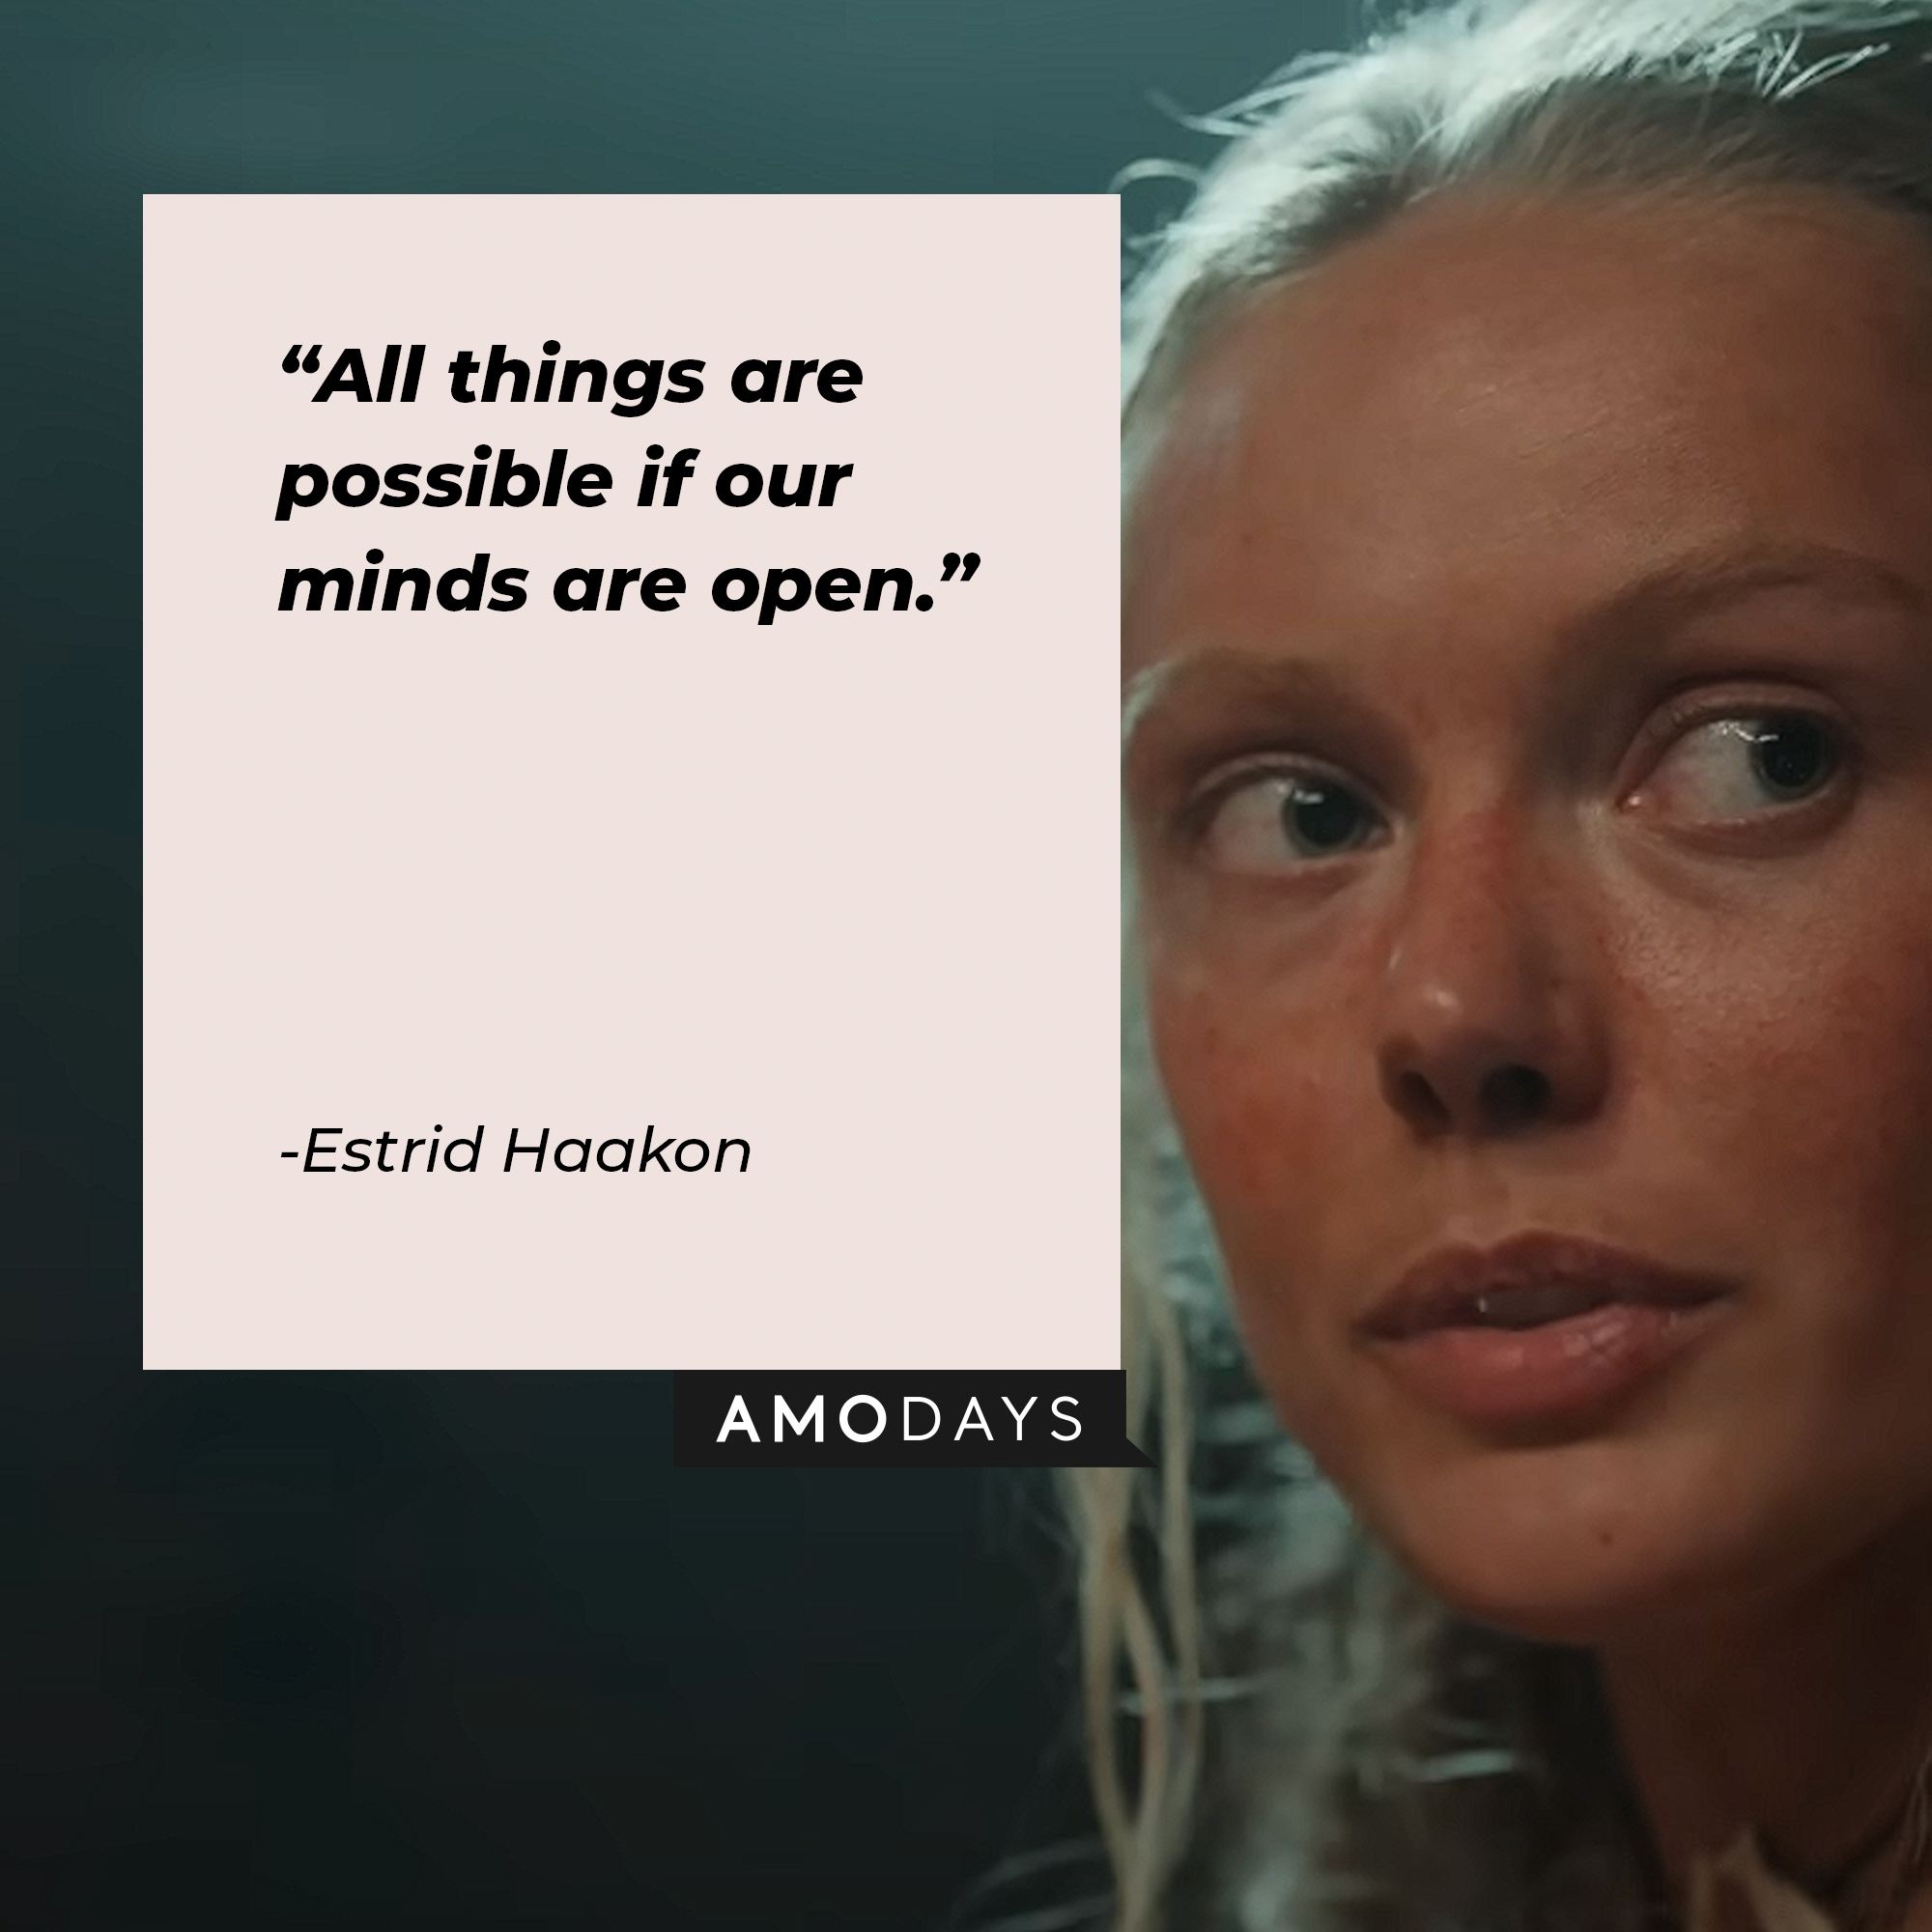 Estrid Haakon's quote: "All things are possible if our minds are open." | Image: youtube.com/Netflix